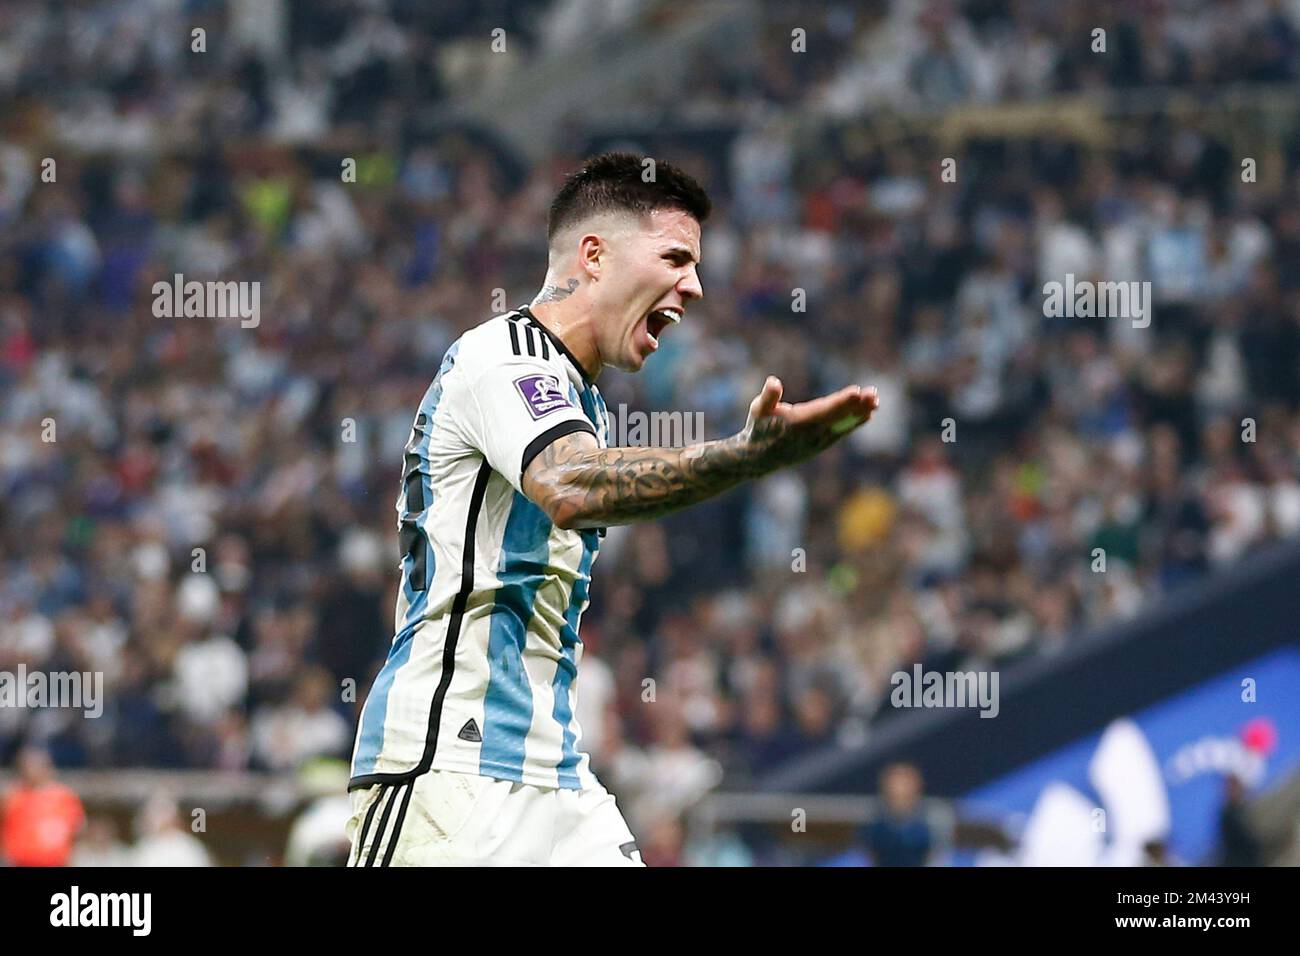 LUSAIL, QATAR - DECEMBER 18: Player of Argentina Enzo Fernández reacts during the FIFA World Cup Qatar 2022 Final match between Argentina and France at Lusail Stadium on December 18, 2022 in Lusail, Qatar. (Photo by Florencia Tan Jun/PxImages) Stock Photo